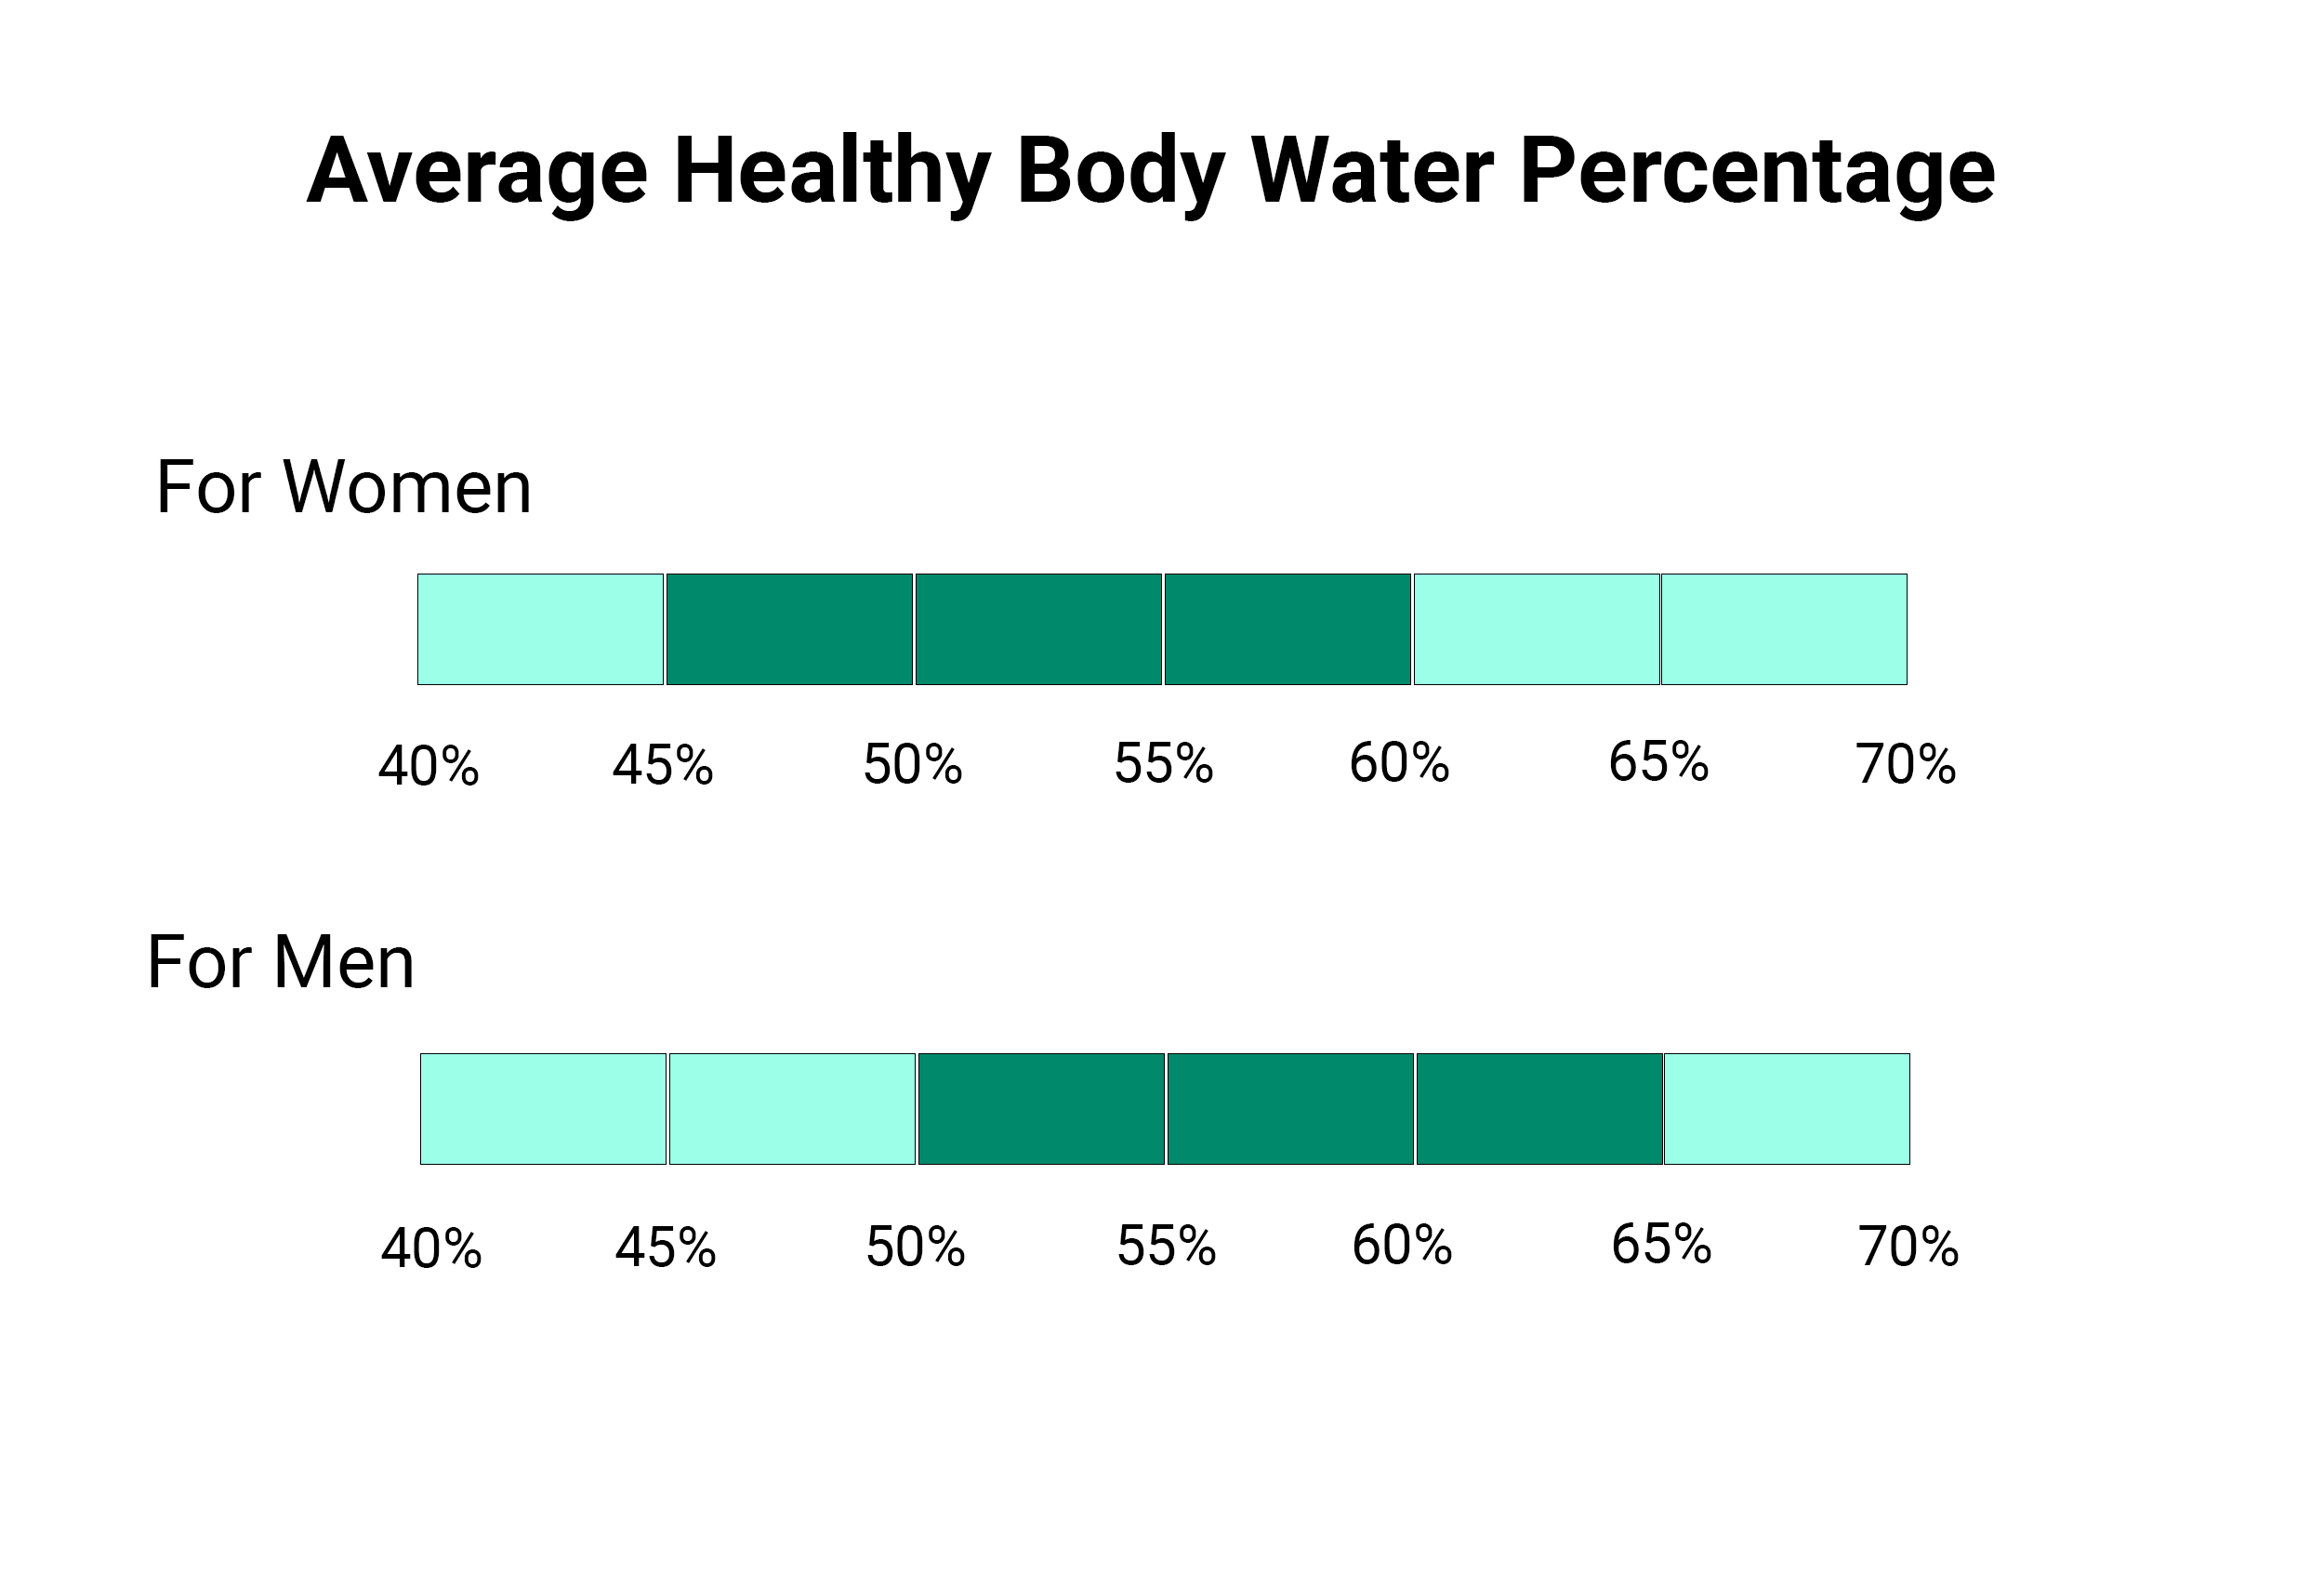 Average Healthy Body Water Percentage for Males and Females